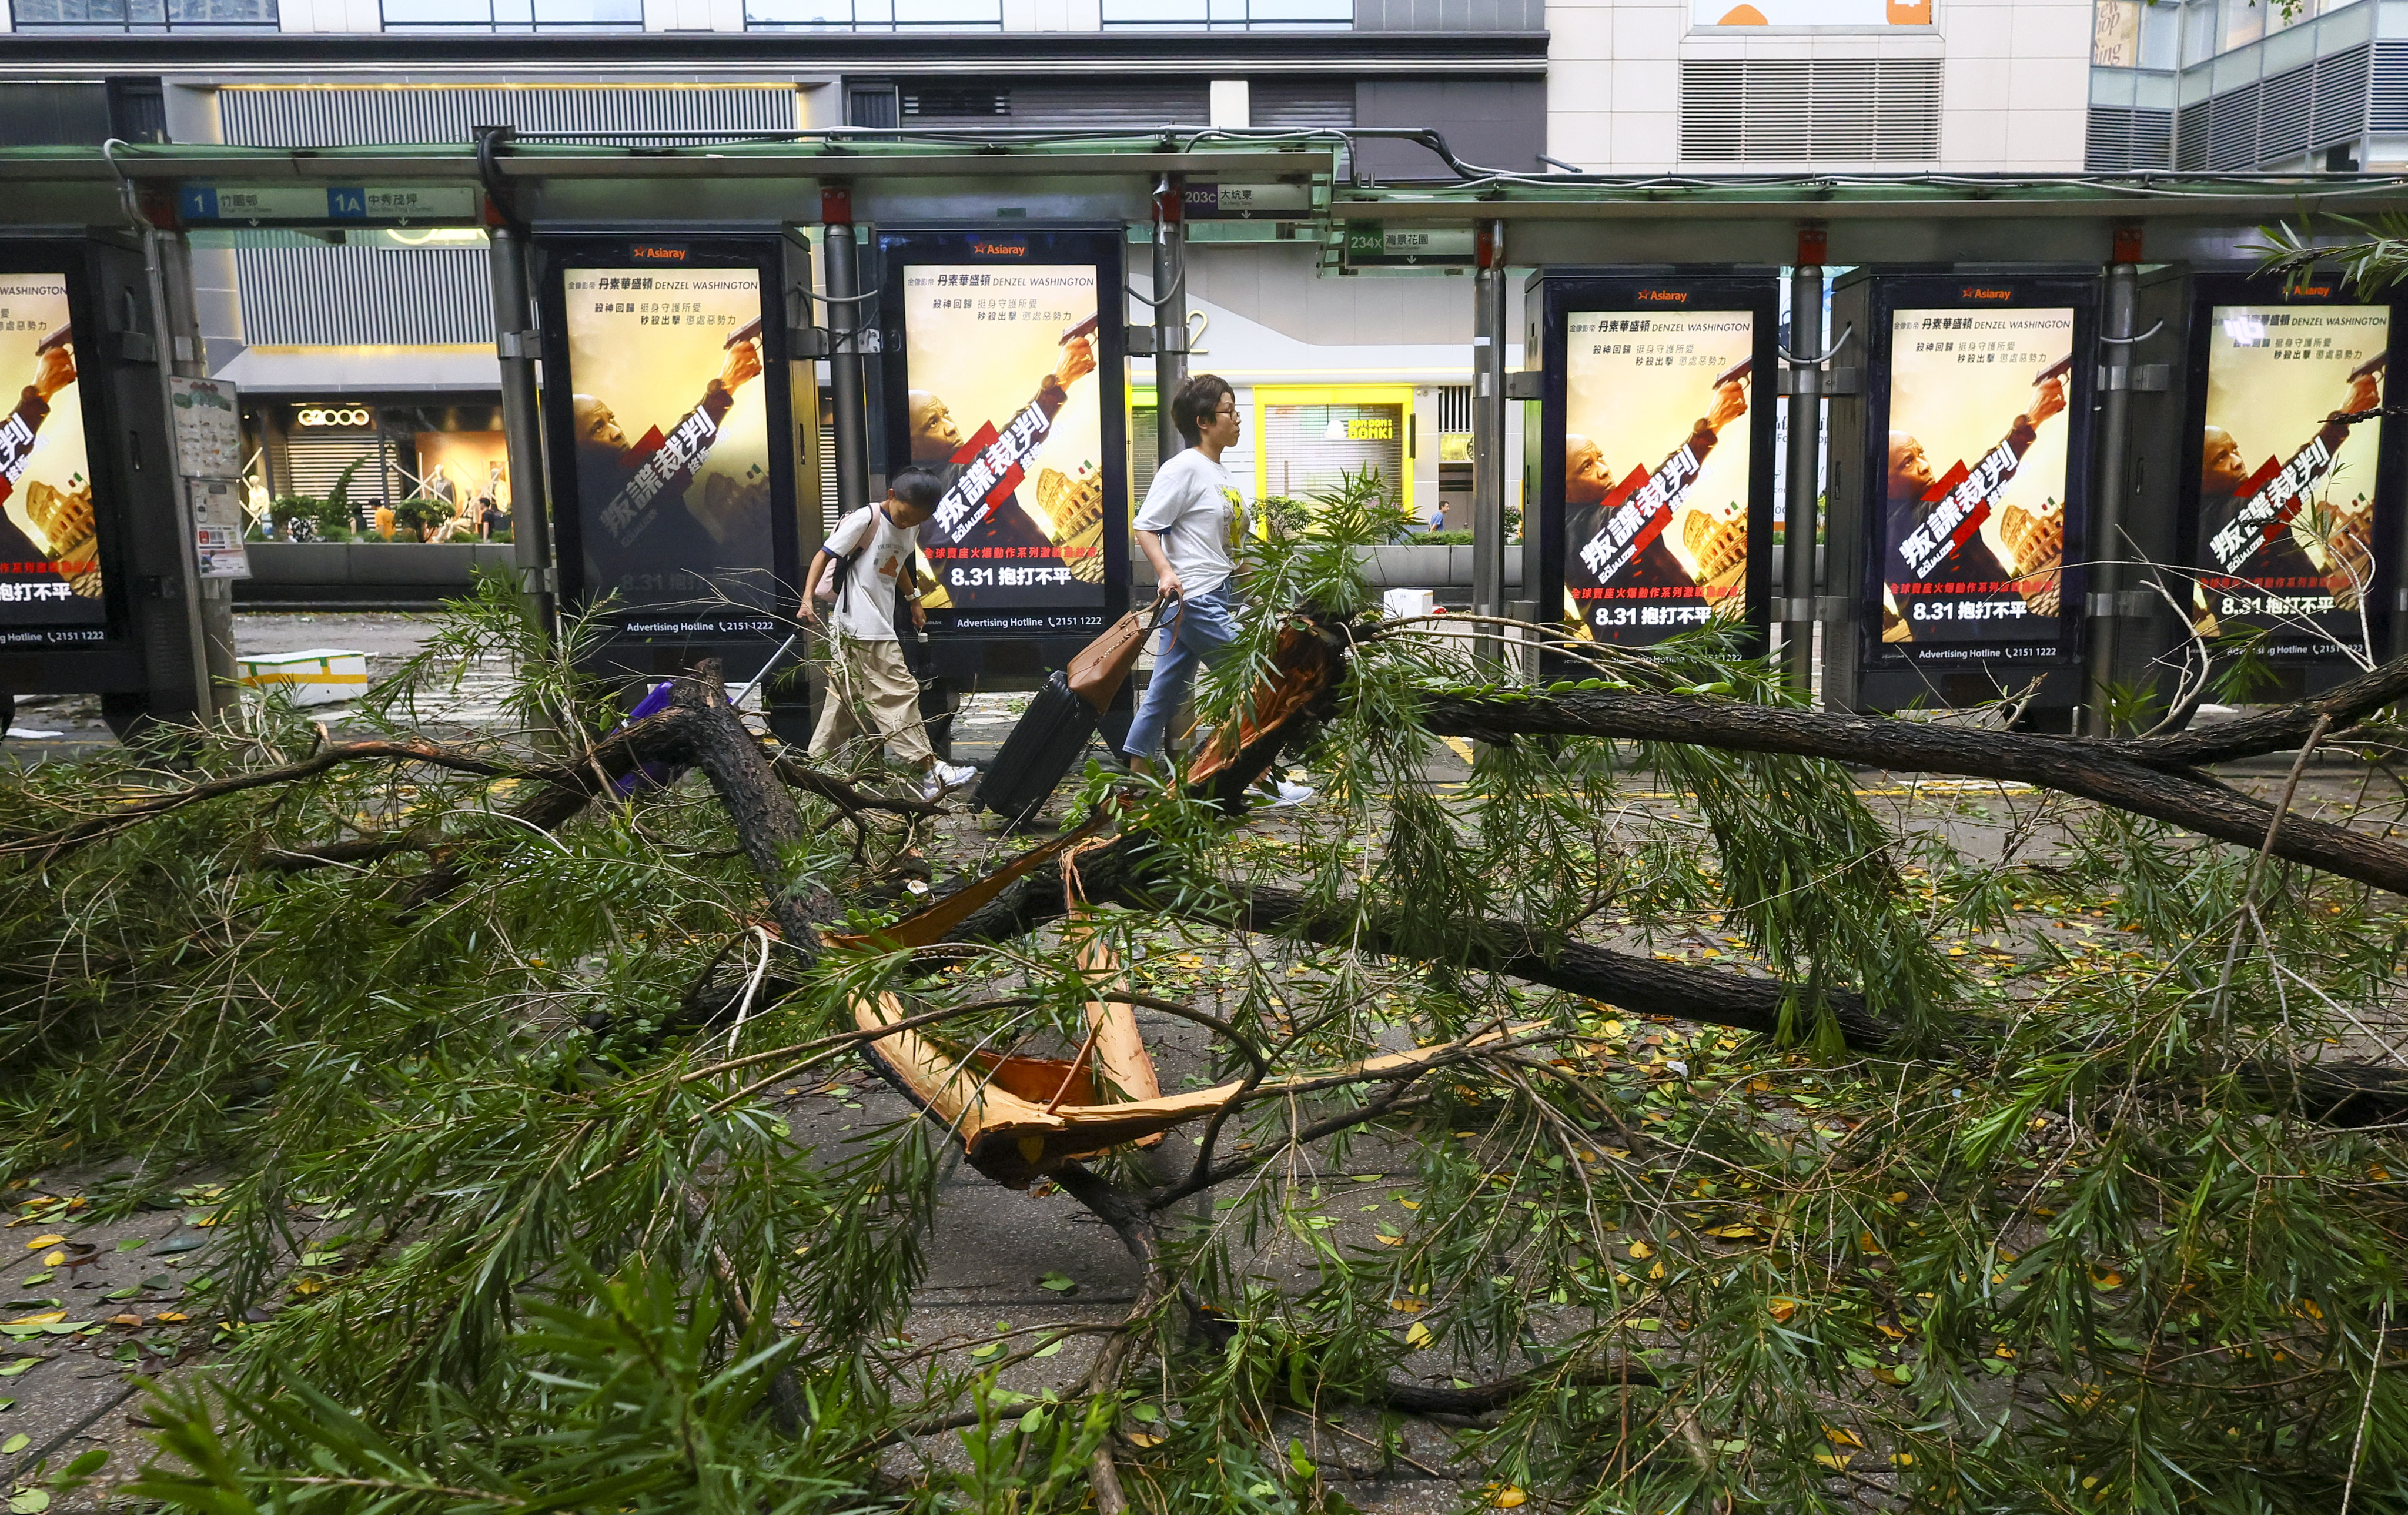 Fallen branches in Tsim Sha Tsui after super typhoon Saola swept through the city, on September 2. Photo: Dickson Lee